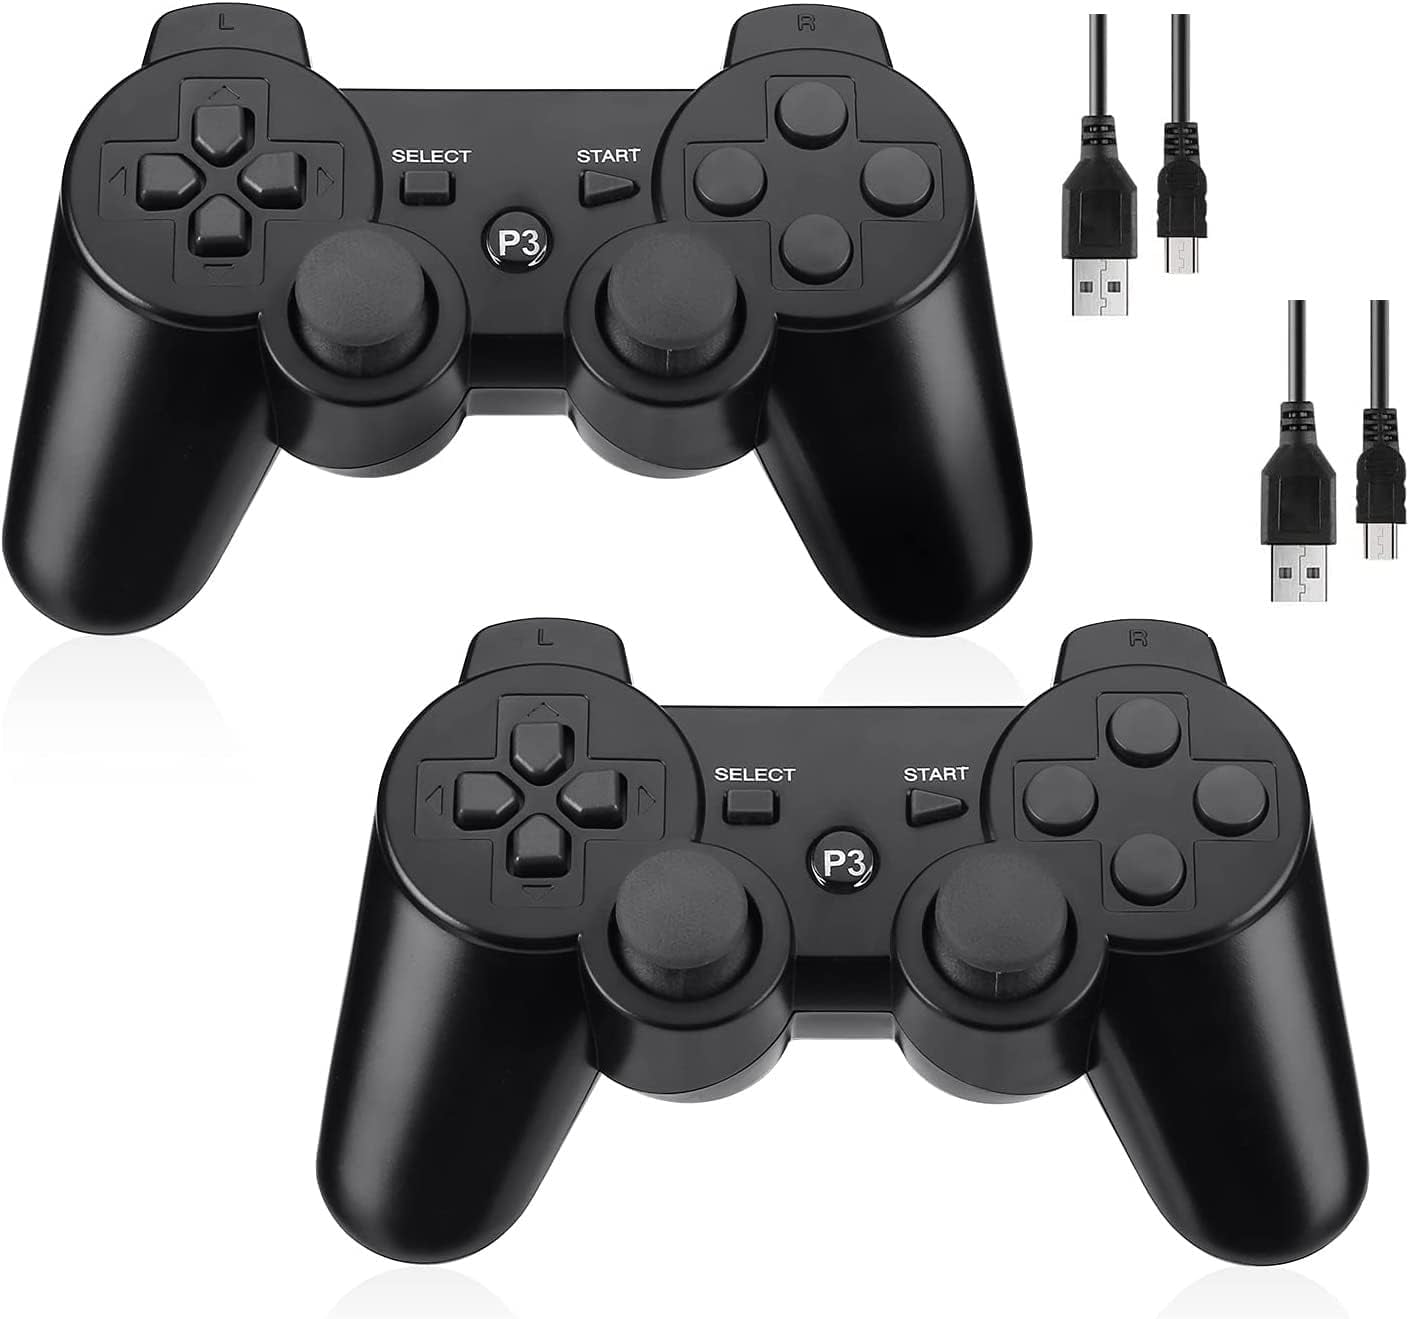 Controller 2 Pack for PS3 Wireless Controller for Sony Playstation 3,  Double Shock 3, Bluetooth, Rechargeable, Motion Sensor, 360° Analog  Joysticks